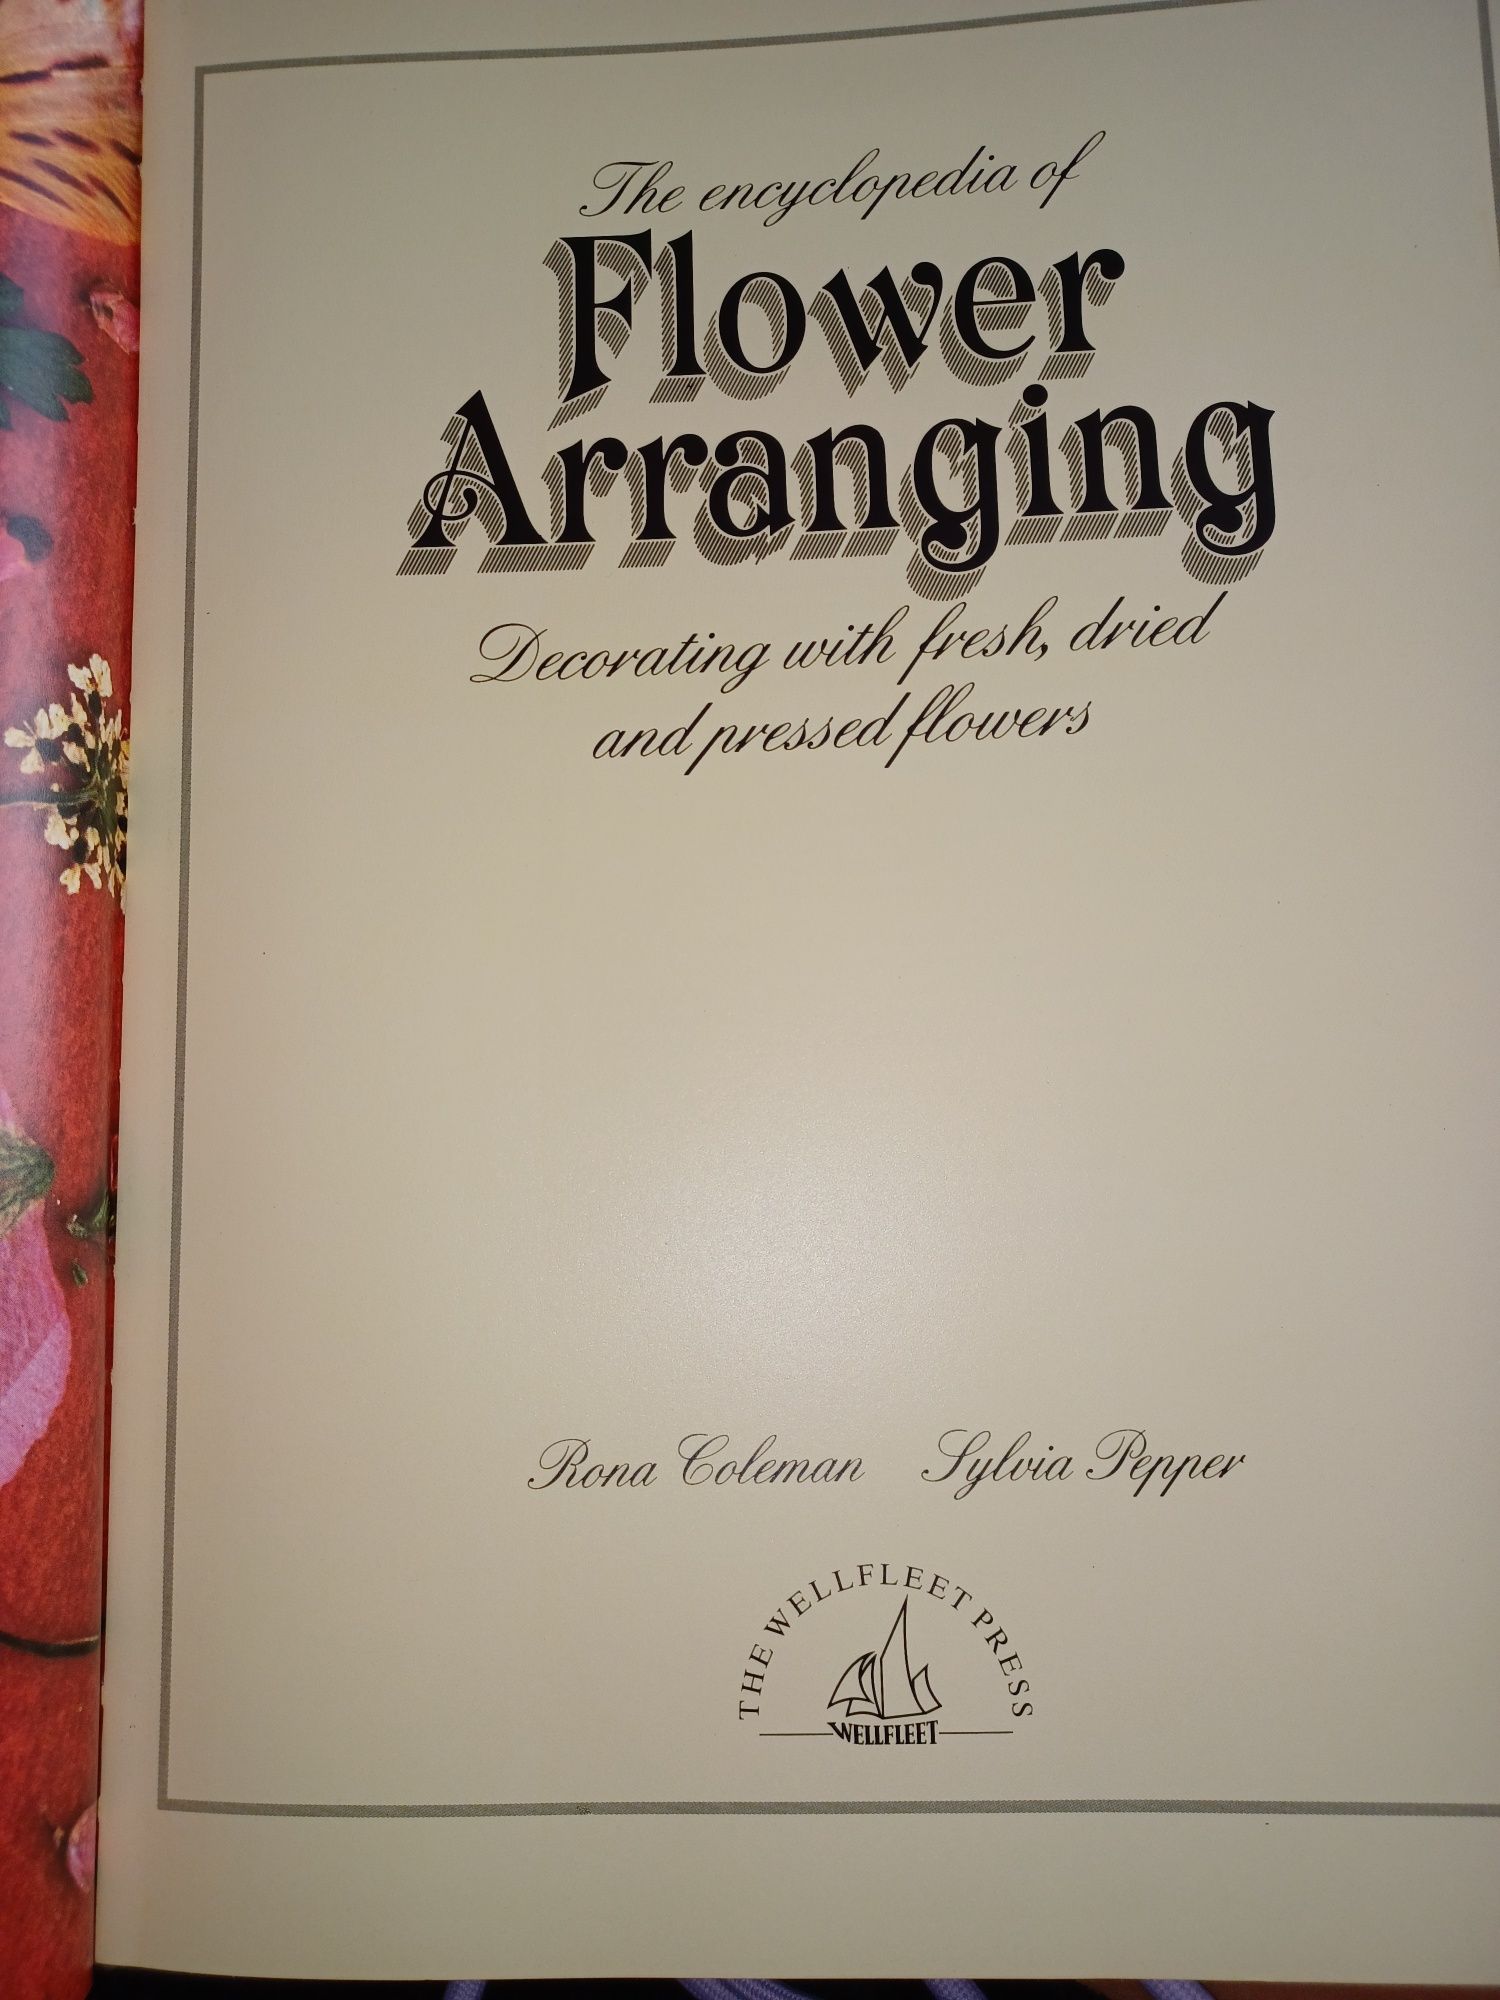 Livro " The encyclopedia of flower arranging"

Decoring with fresh, d